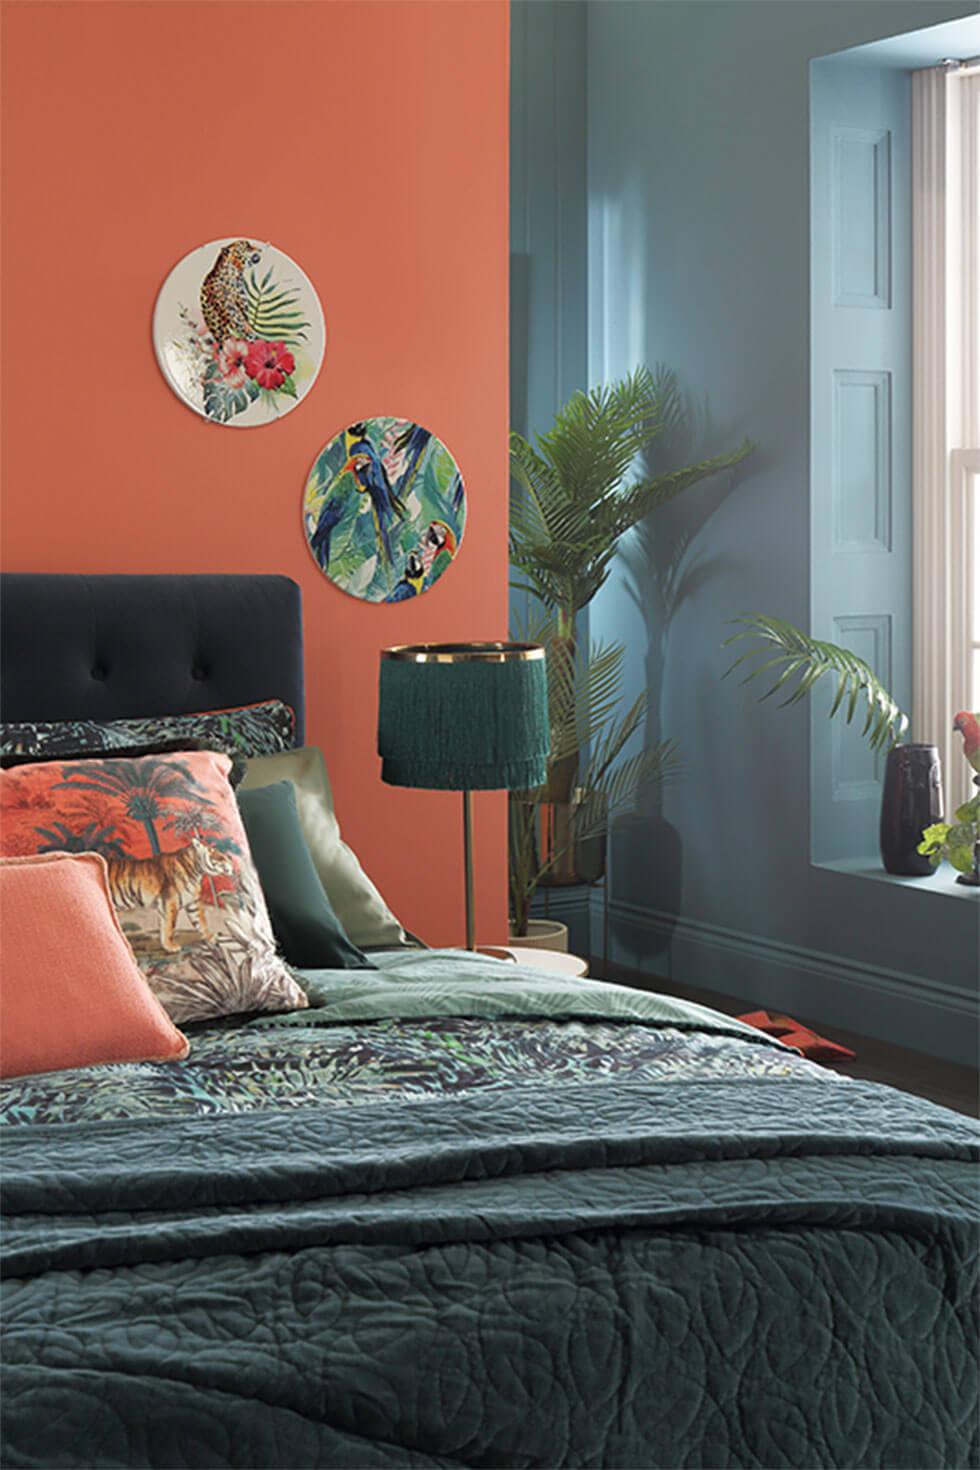 A bedroom with contrasting colour block painted walls in teal and coral.